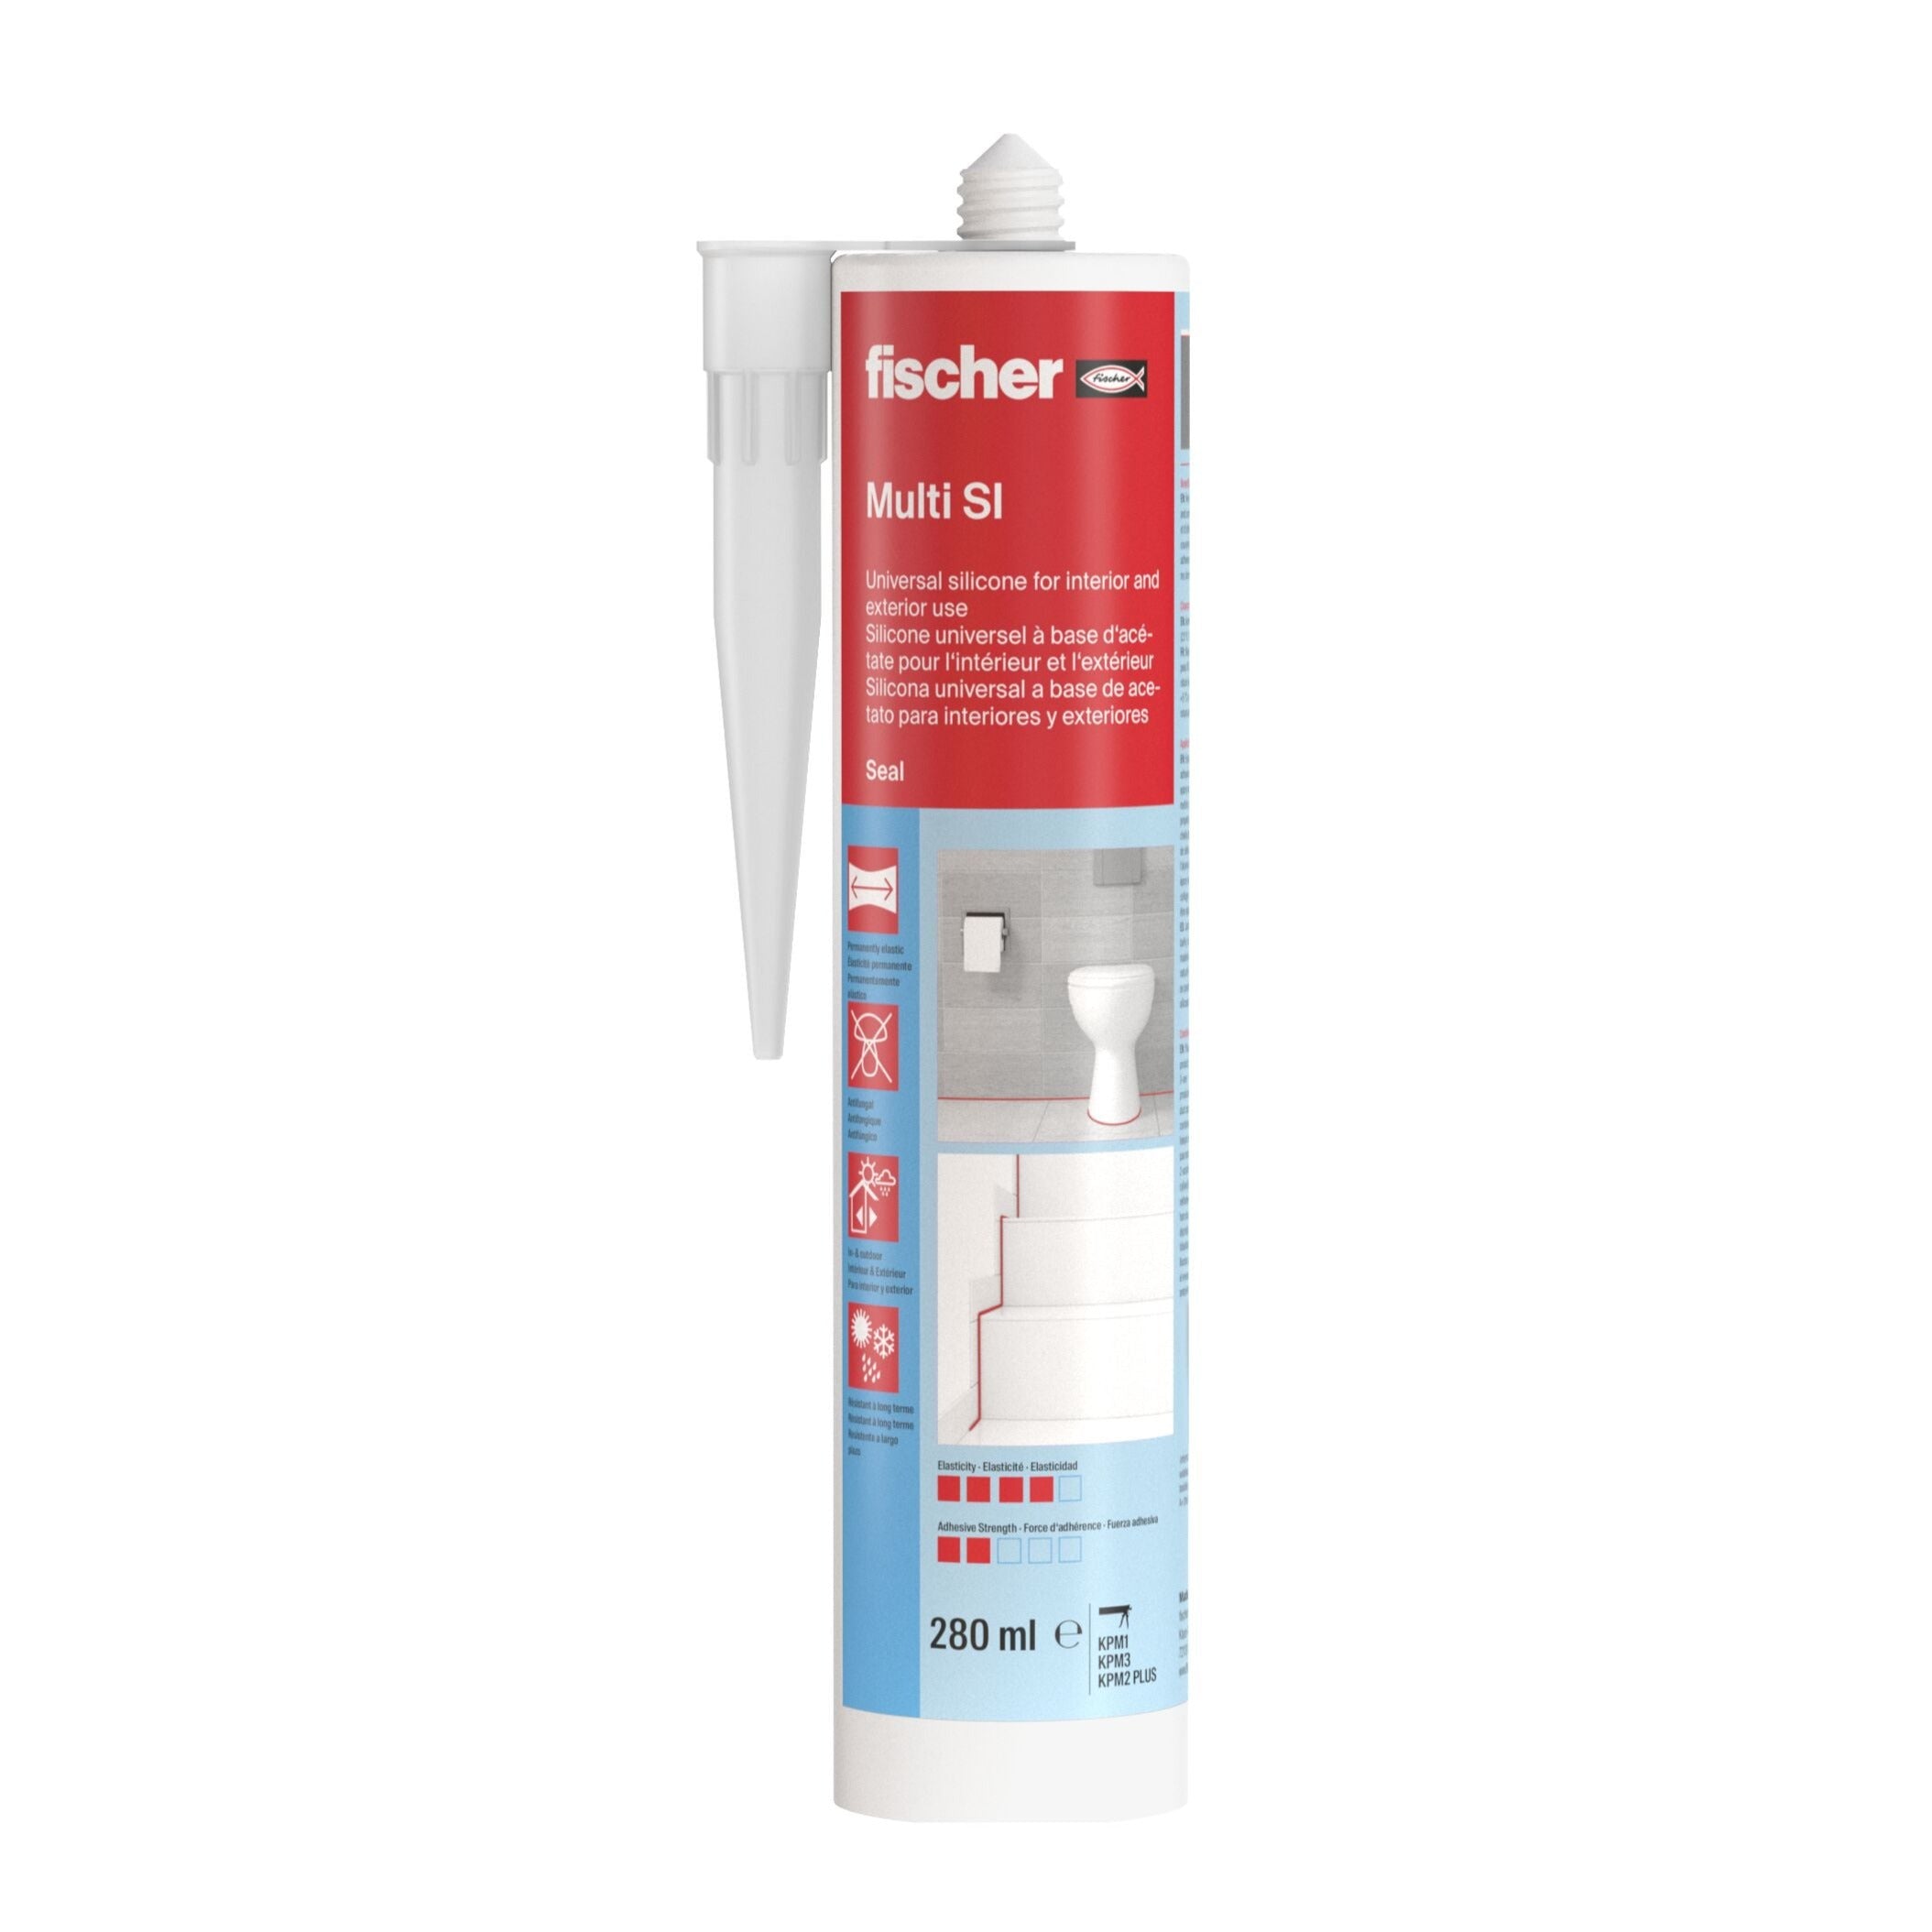 Fischer Multisilicone DMS - General Purpose Sealant with Acetate